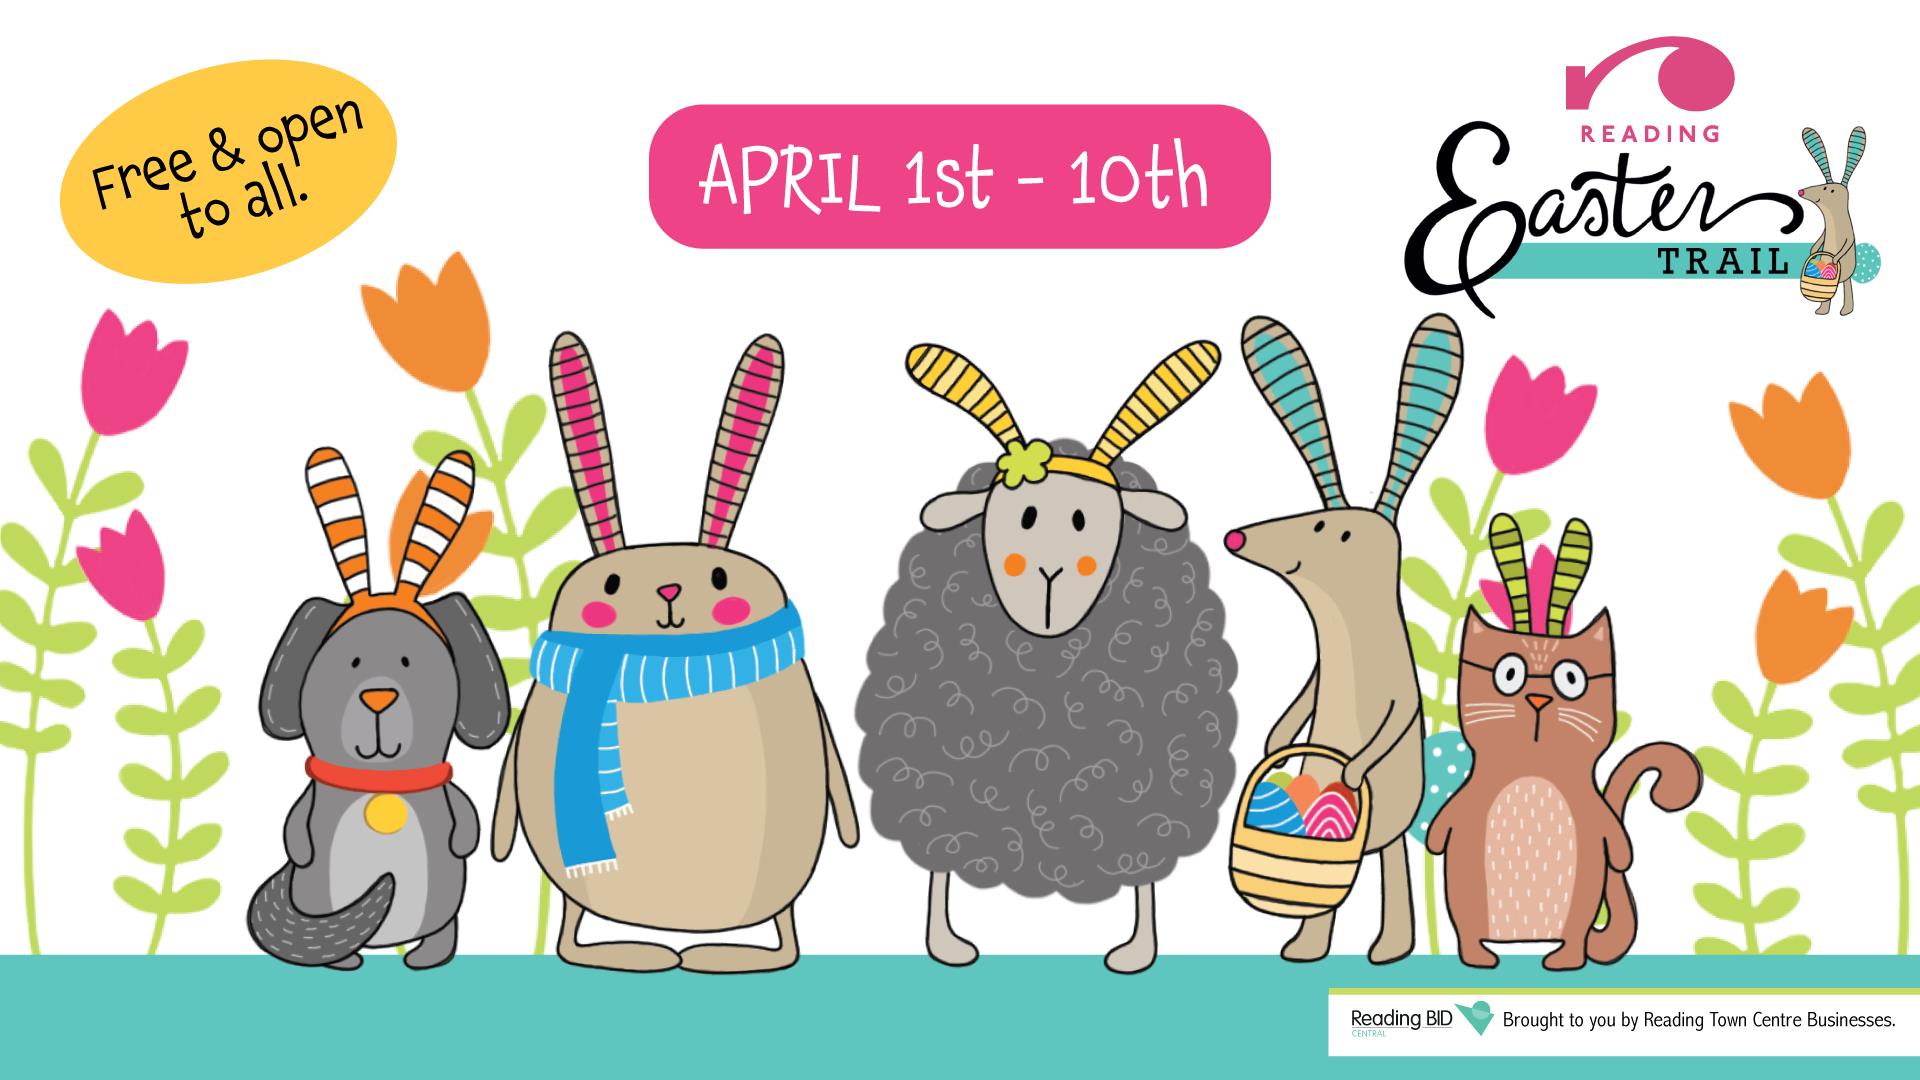 Graphic with Easter animals advertising Reading's Easter Trail for 2023